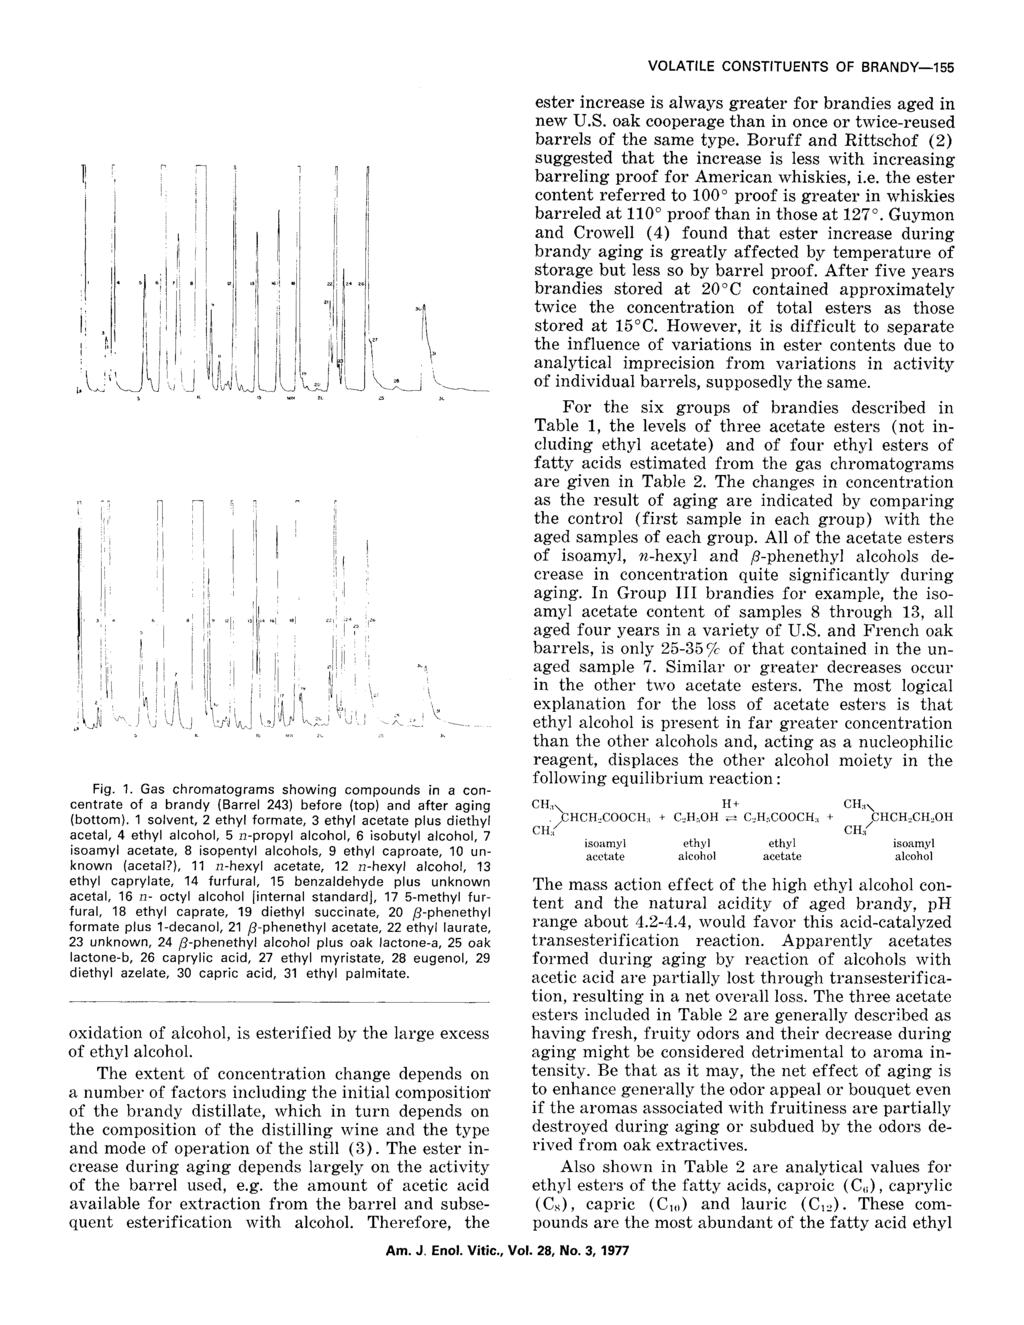 VOLATILE CONSTITUENTS OF BRANDY~155 i' i i. 3 4 6.~.6i ]! i i'' i27 1 ii I!2o 2,?,i Fig. 1. Gas chromatograms showing compounds in a concentrate of a brandy (Barrel 243) before (top) and after aging (bottom).